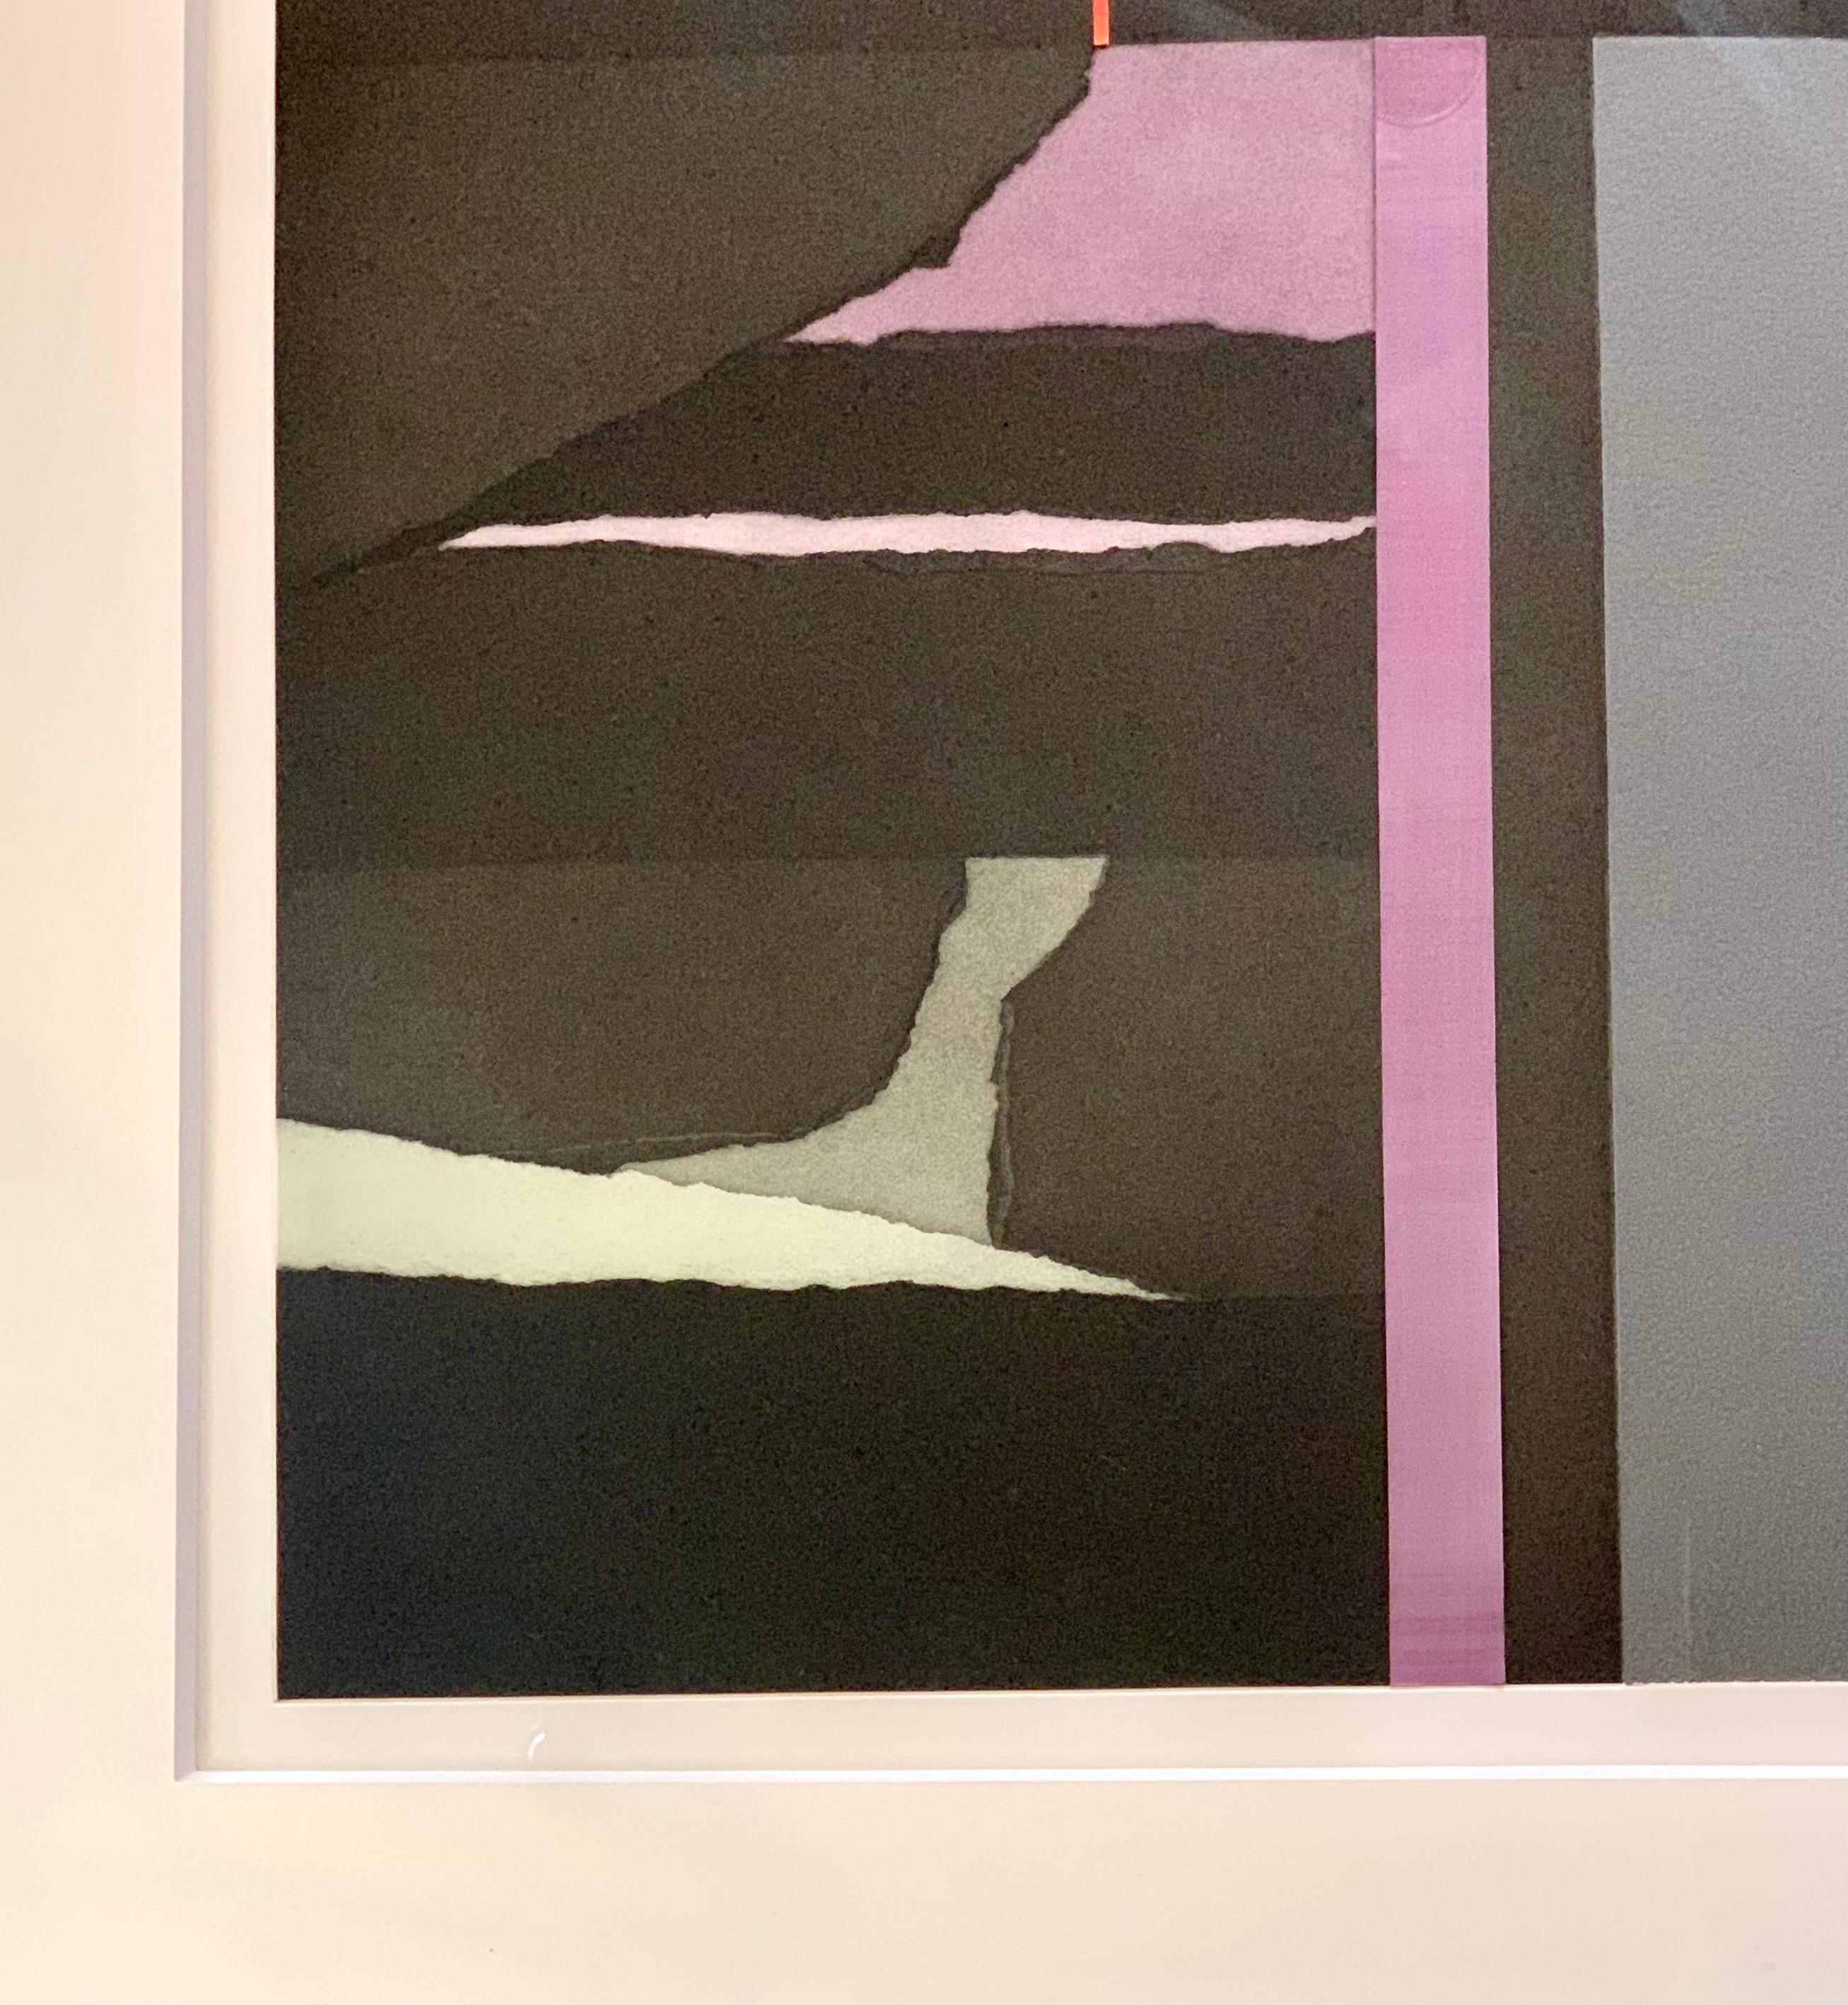 Although Nevelson is best known as a sculptor, like many of her contemporaries, Nevelson expanded her practice by exploring different branches of printmaking. As a printmaker Nevelson was particularly curious, consistently experimenting with